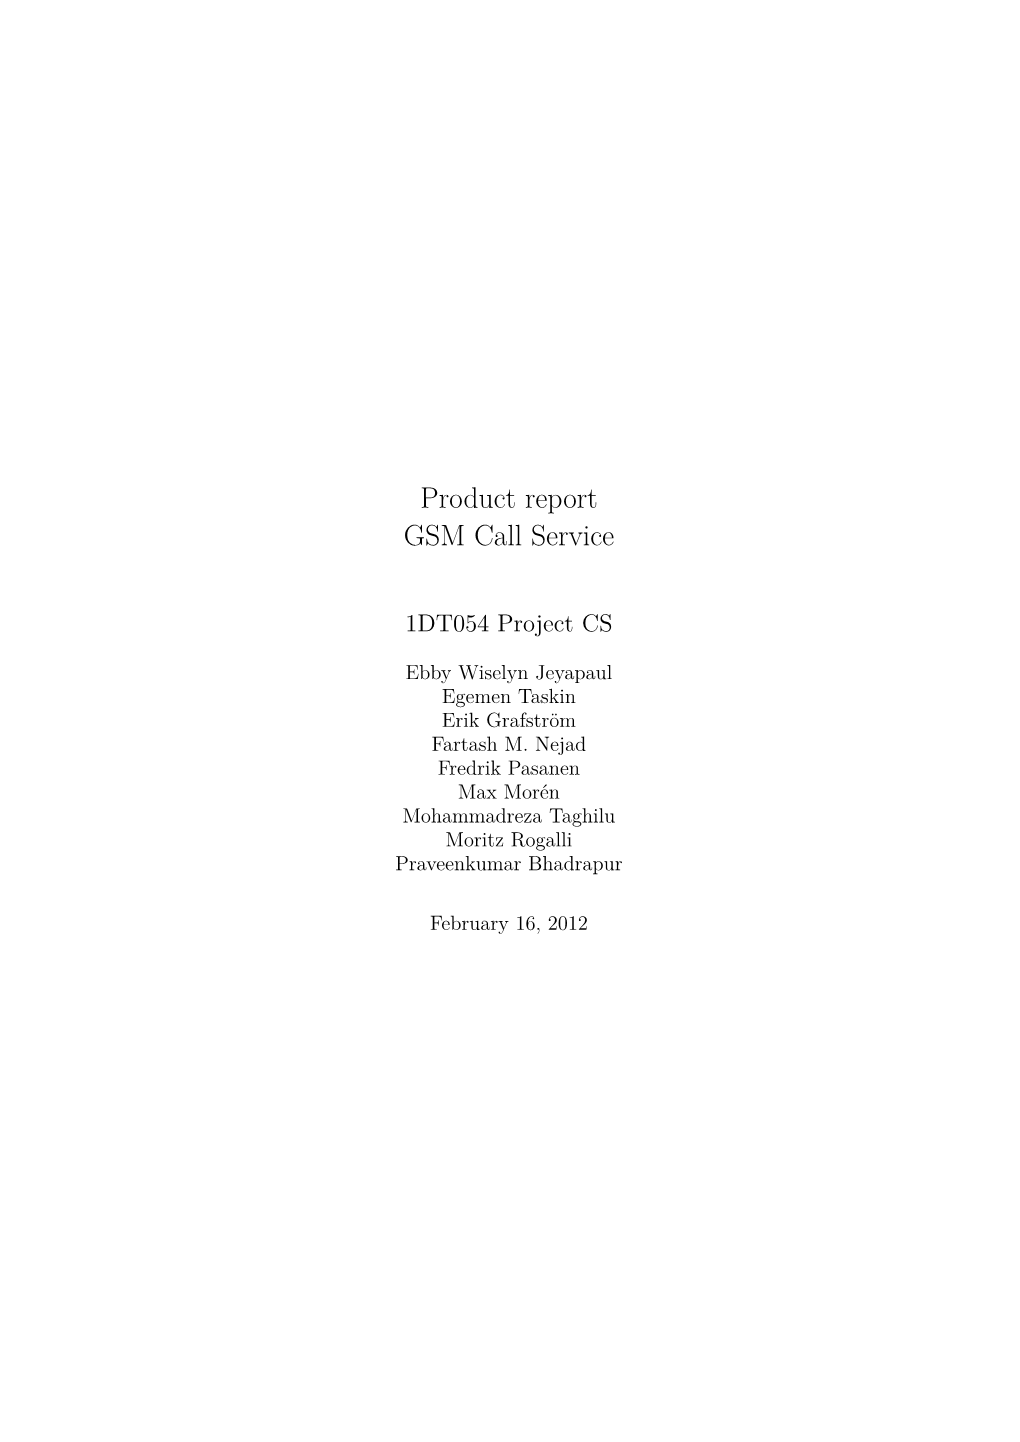 Product Report GSM Call Service